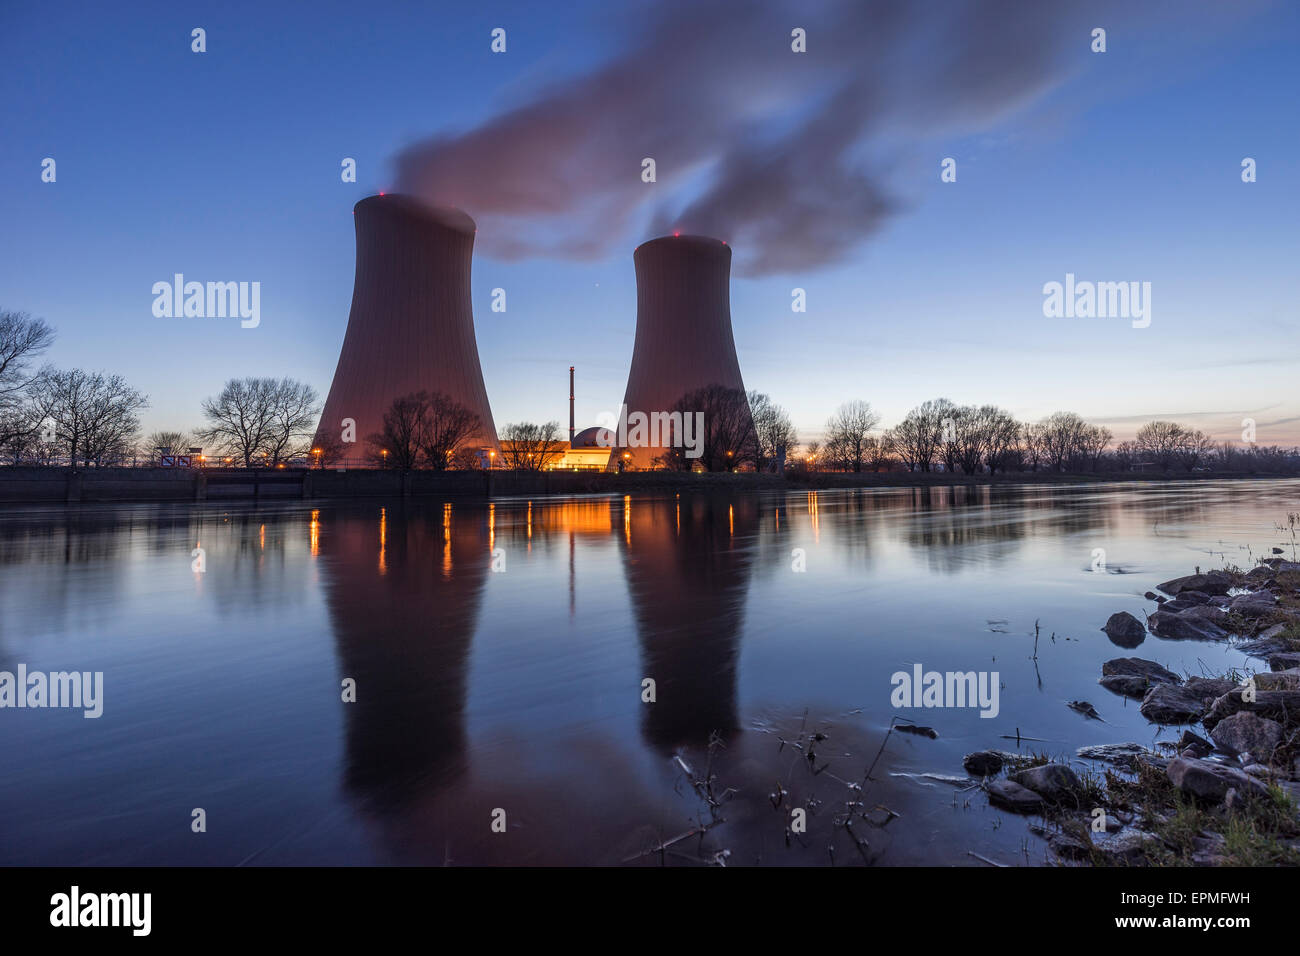 Germany, Lower Saxony, Grohnde, Grohnde Nuclear Power Plant Stock Photo